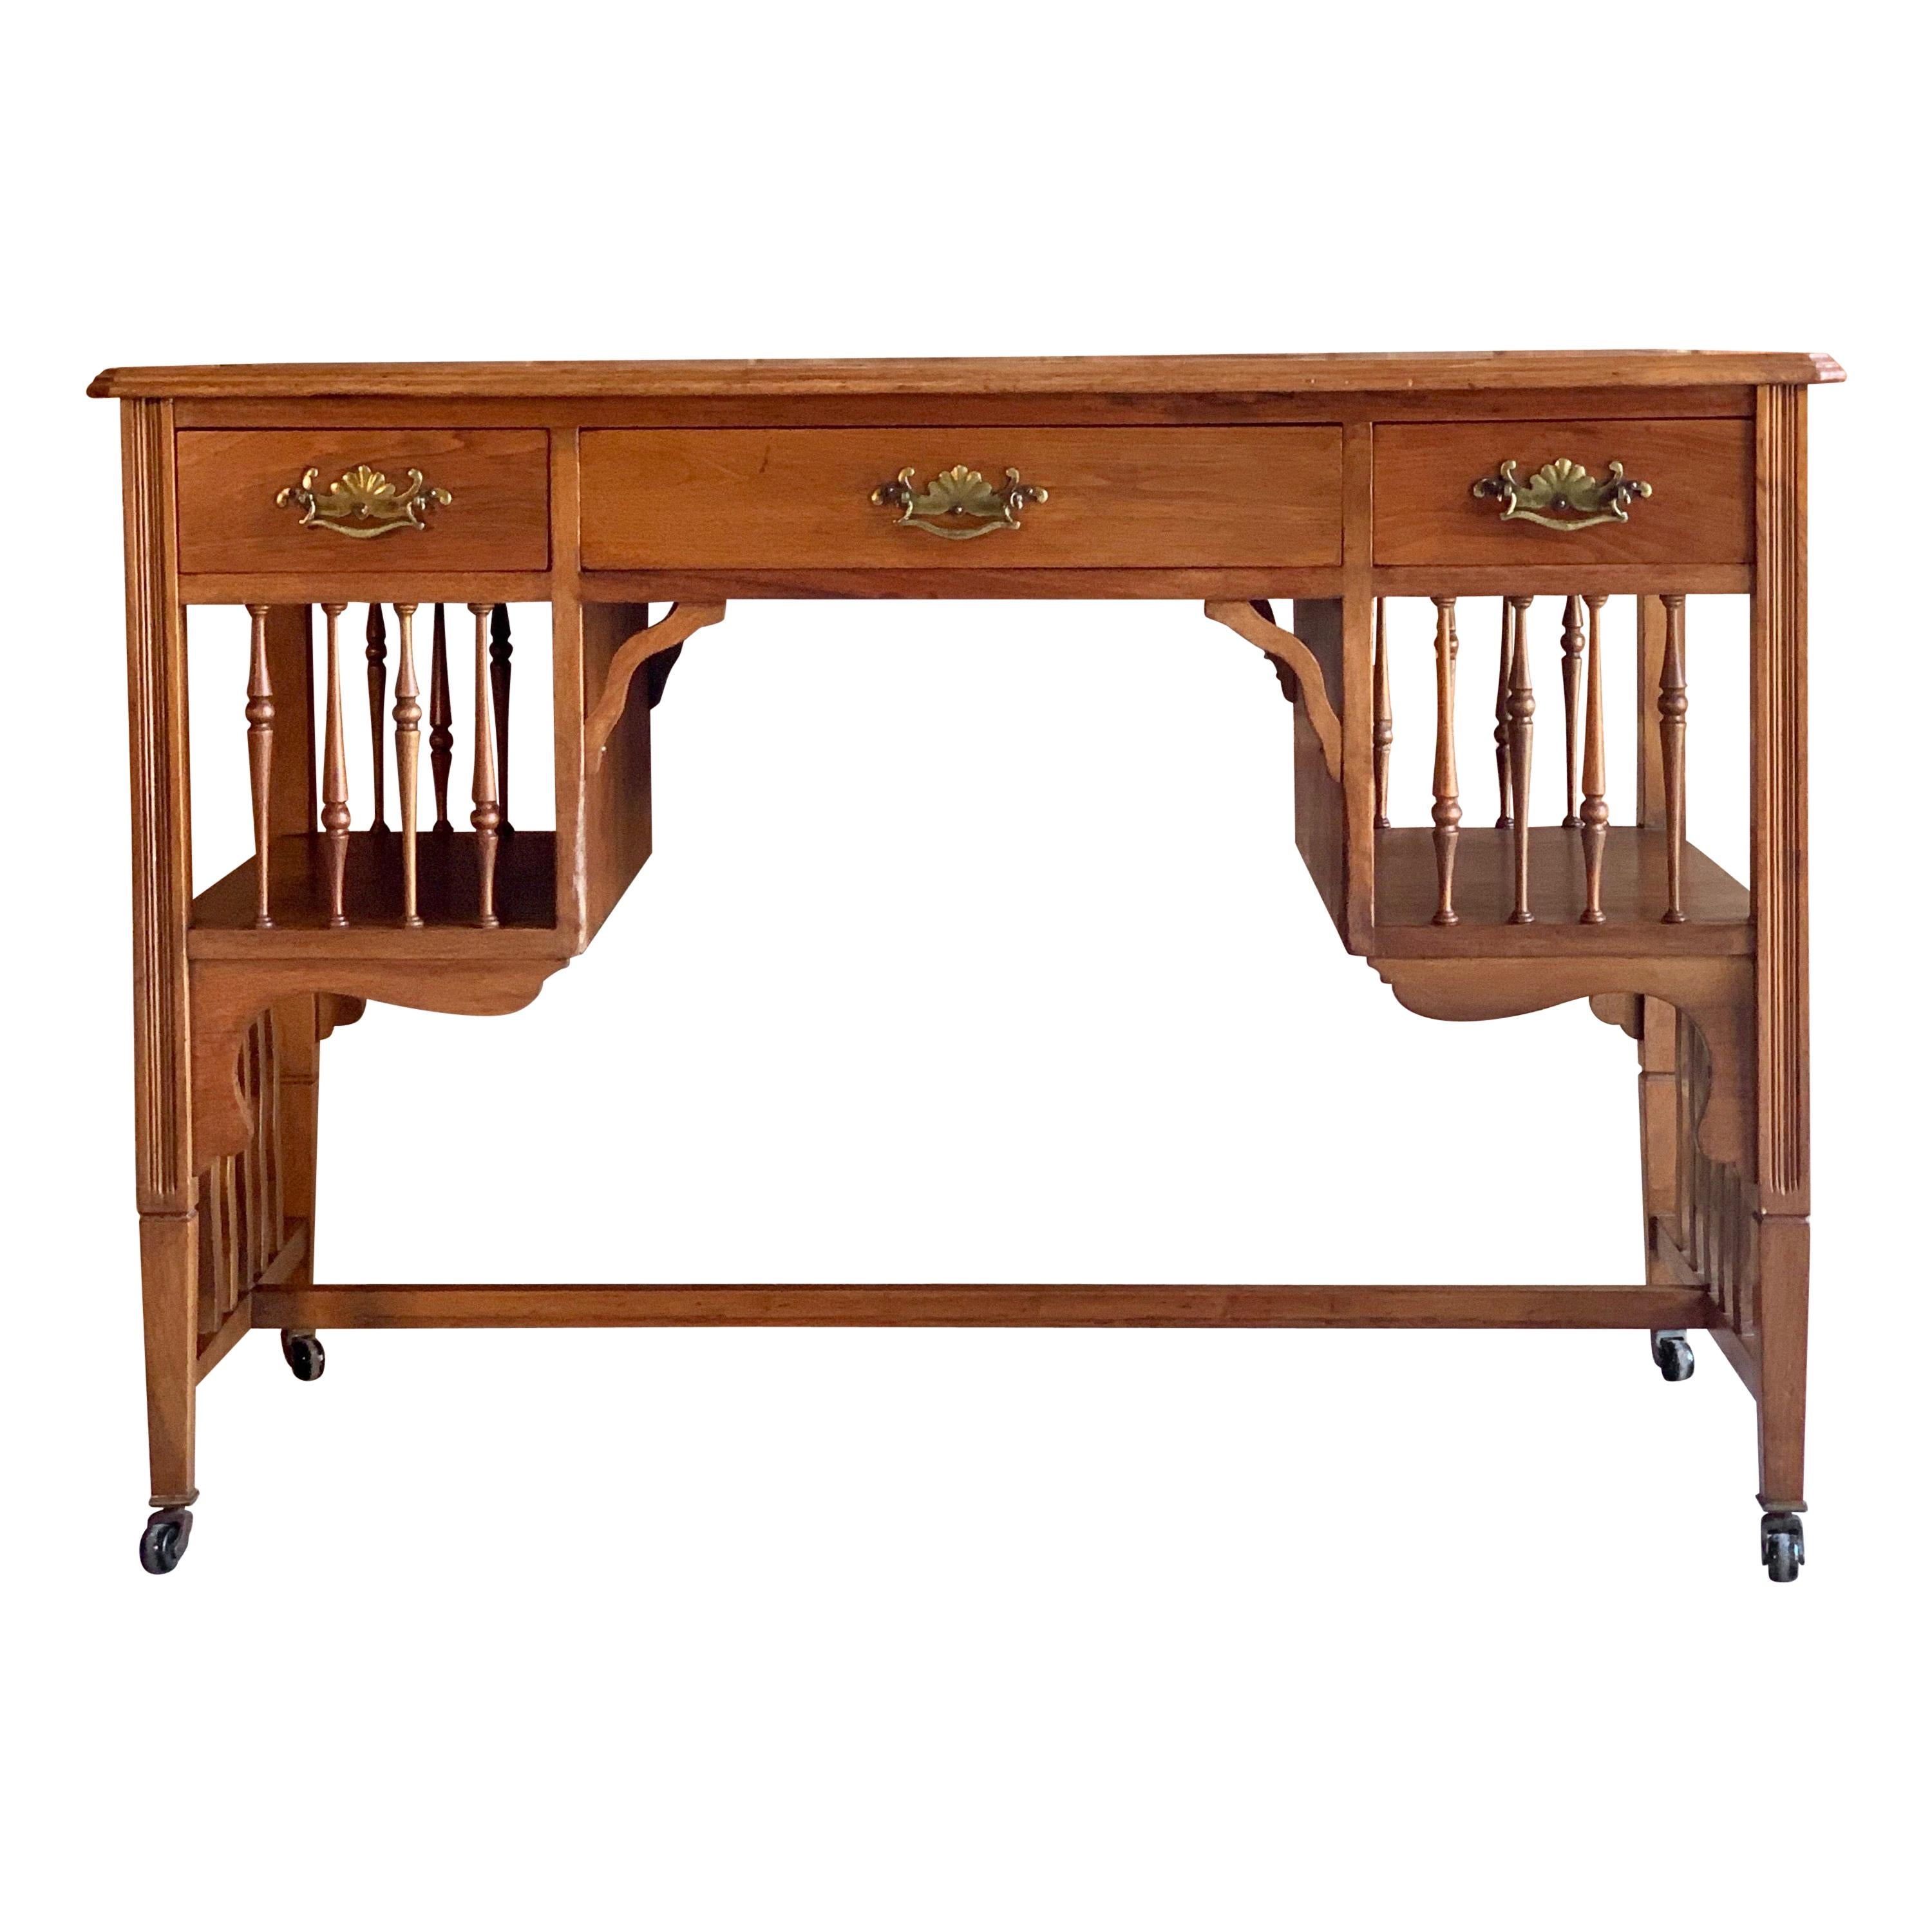 Magnificent Arts & Crafts walnut knee hole desk, circa 1920, in the style of J S Henry, the rectangular burgundy leather inset top with three frieze drawers each with brass drop handles flanked by two book shelves with spindled galleries to the